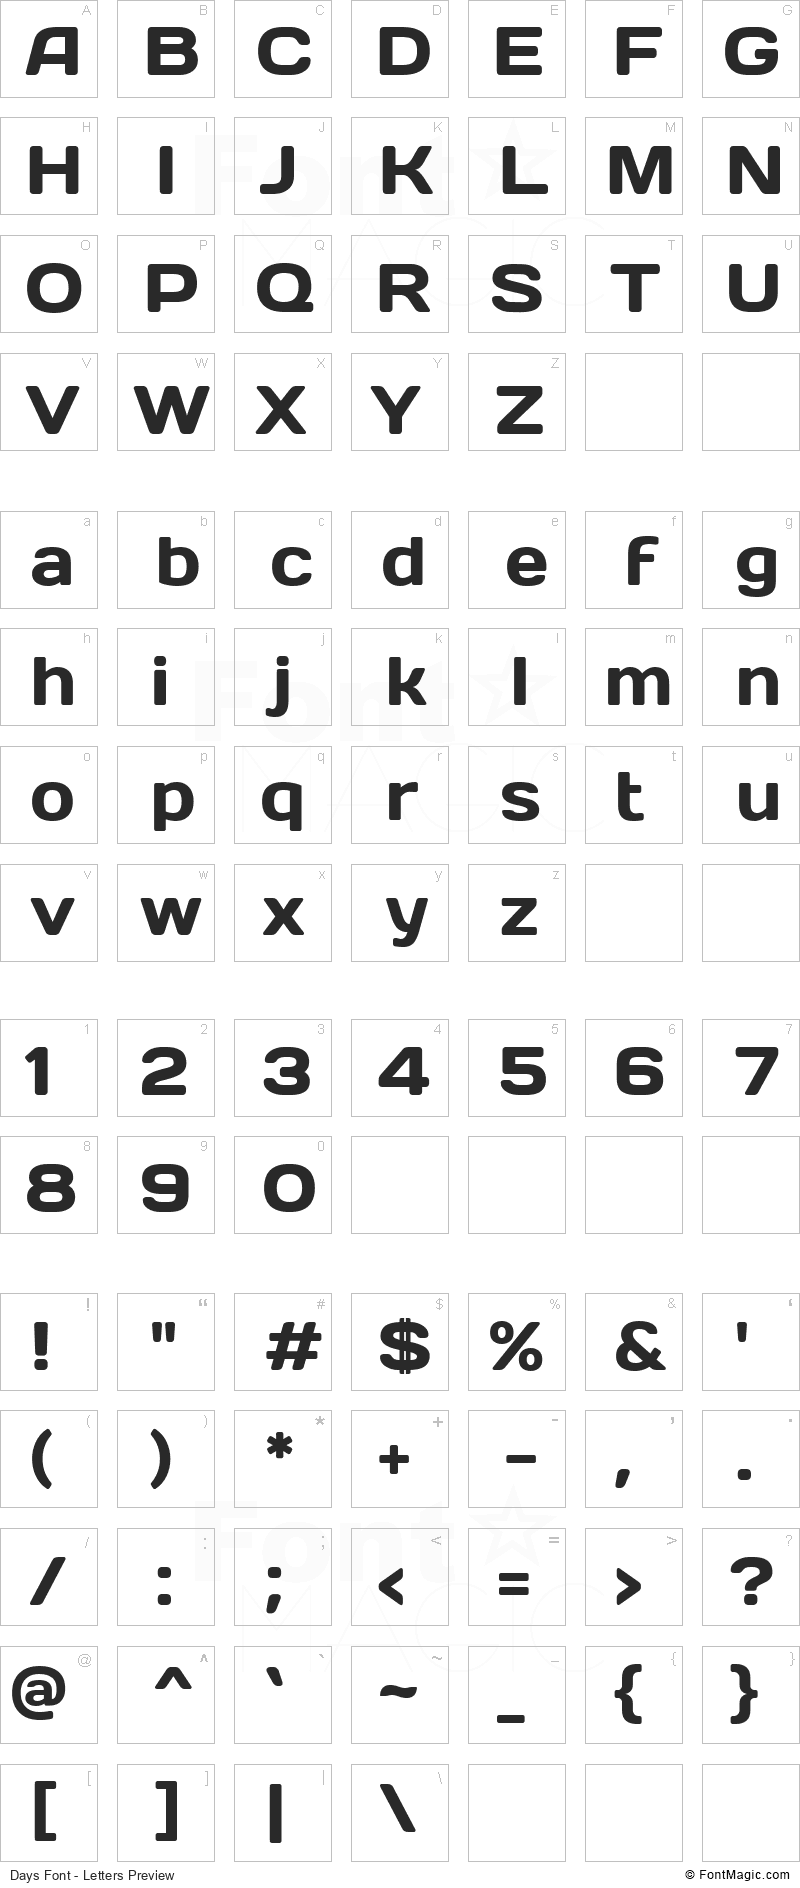 Days Font - All Latters Preview Chart